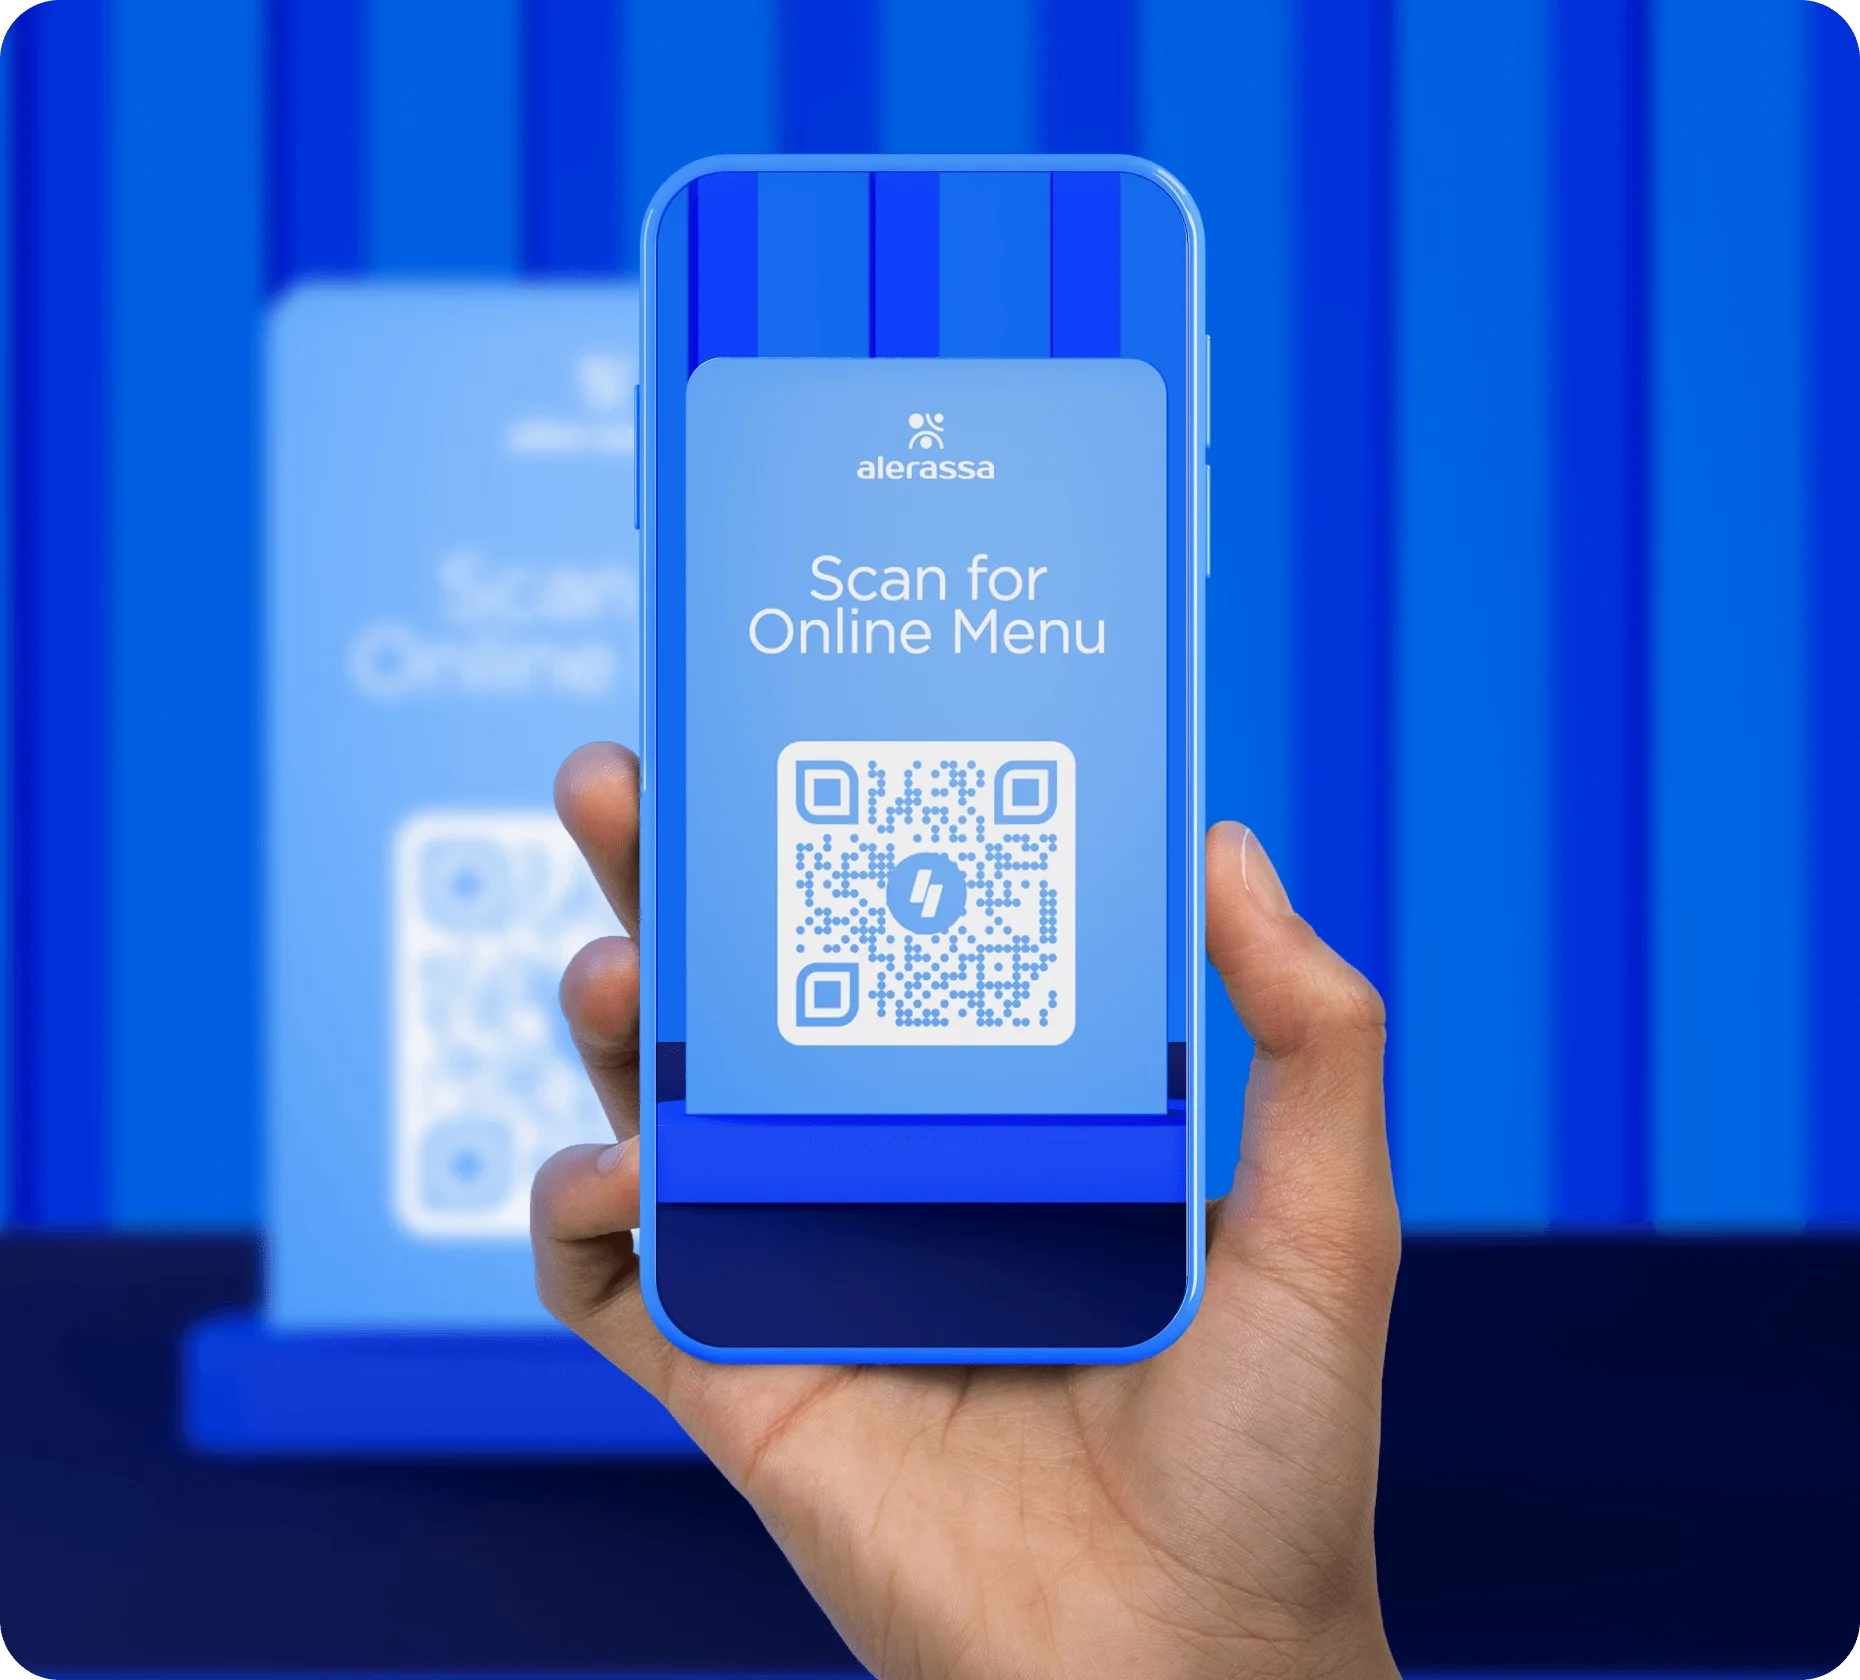 QR Code Sample Interface with Hand Holding Mobile Device